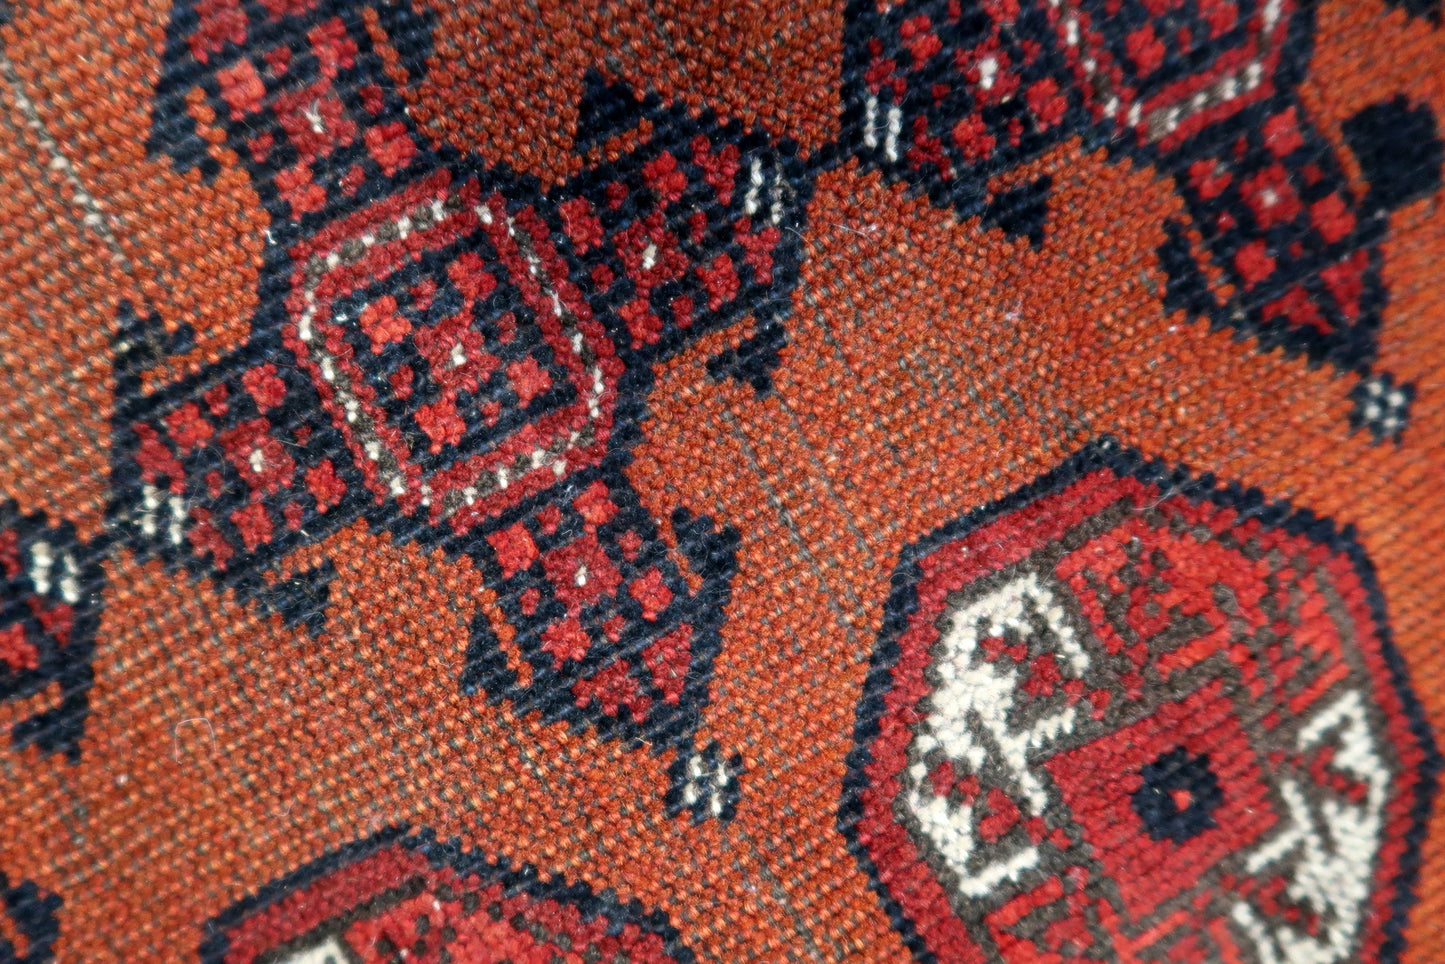 Close-up of vintage charm on Handmade Antique Afghan Baluch Rug - Detailed view emphasizing the rug's vintage charm and historical significance.